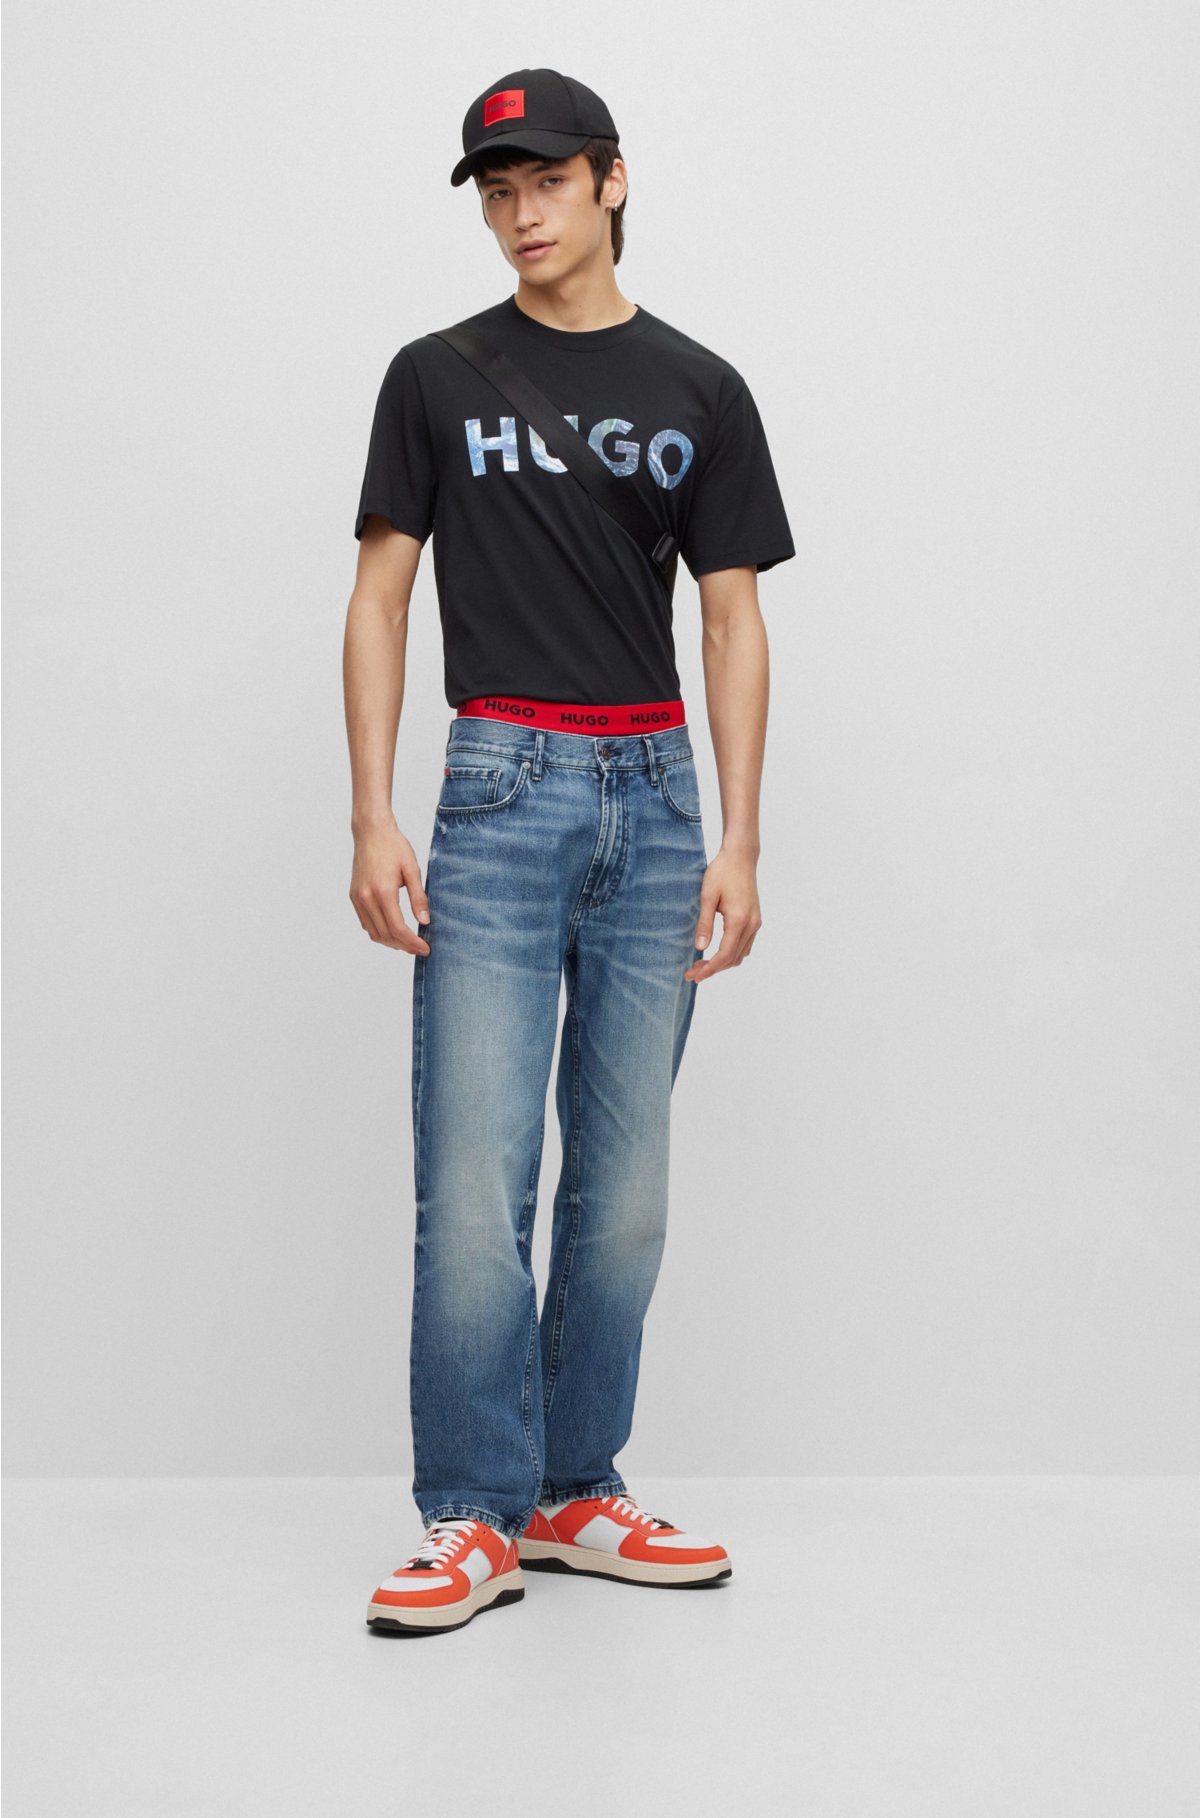 Cotton-jersey - HUGO with slogan and T-shirt logo